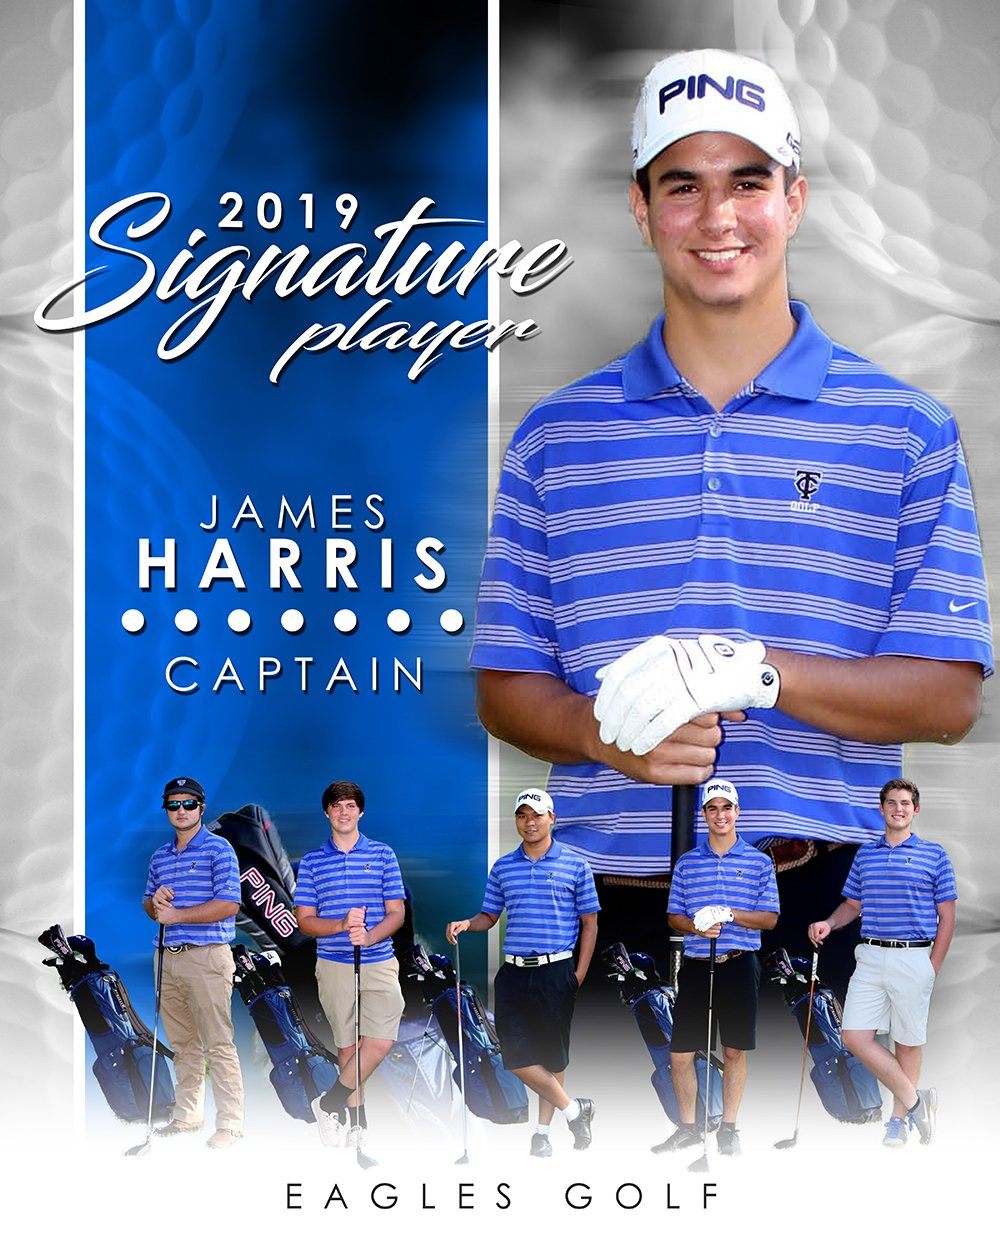 Golf- v.1 - Signature Player - V T&I Poster/Banner-Photoshop Template - Photo Solutions